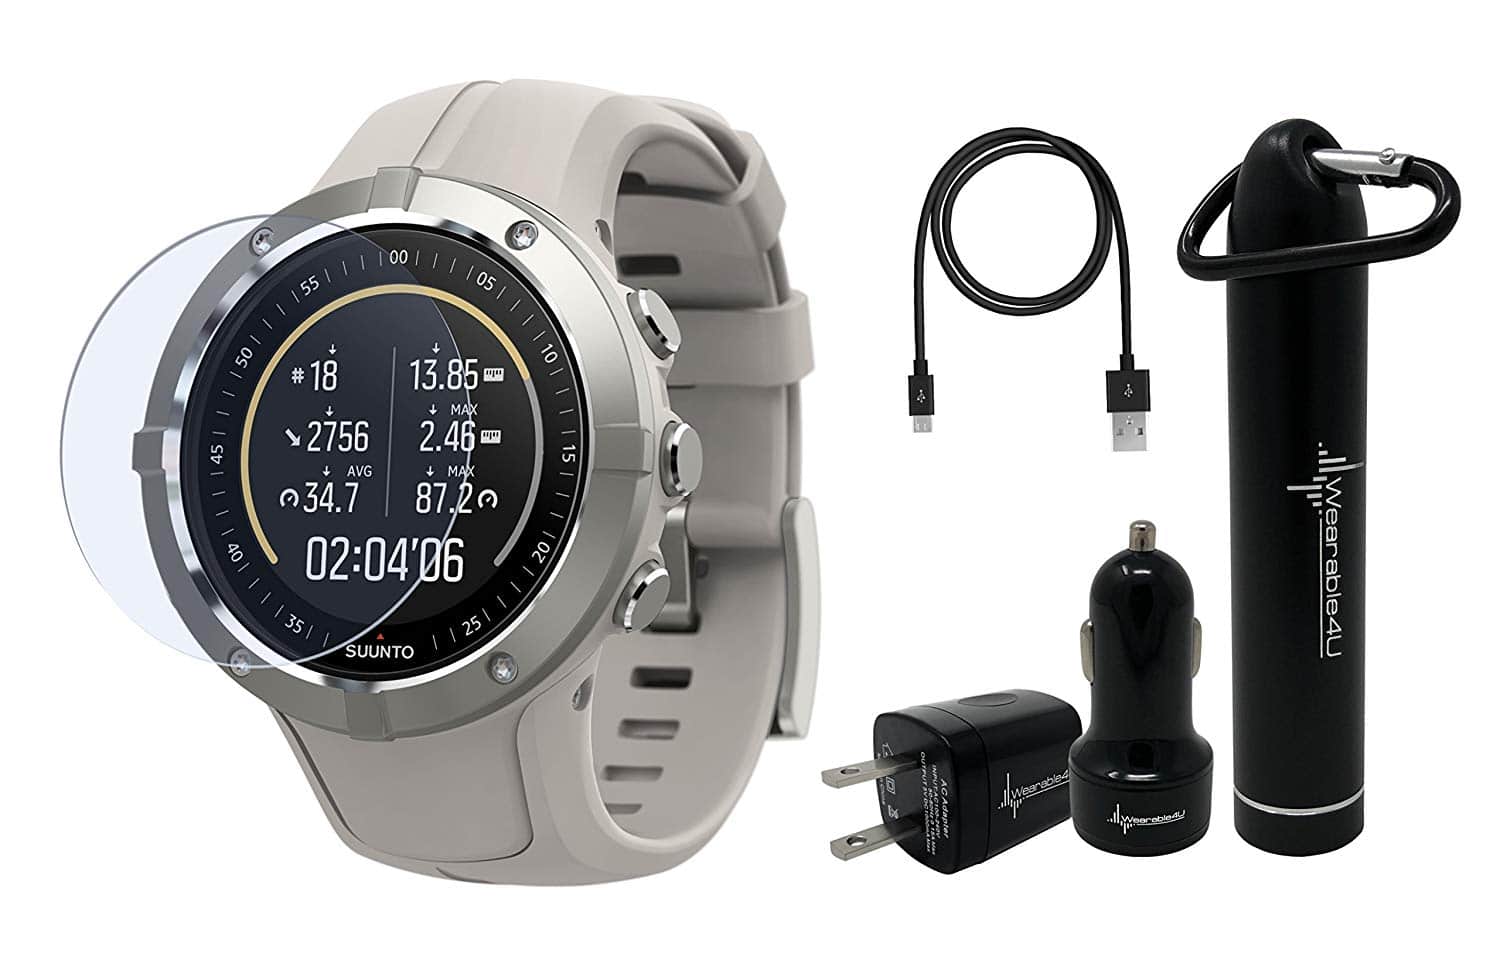 Suunto Spartan Trainer Review - Best Fitness Monitor